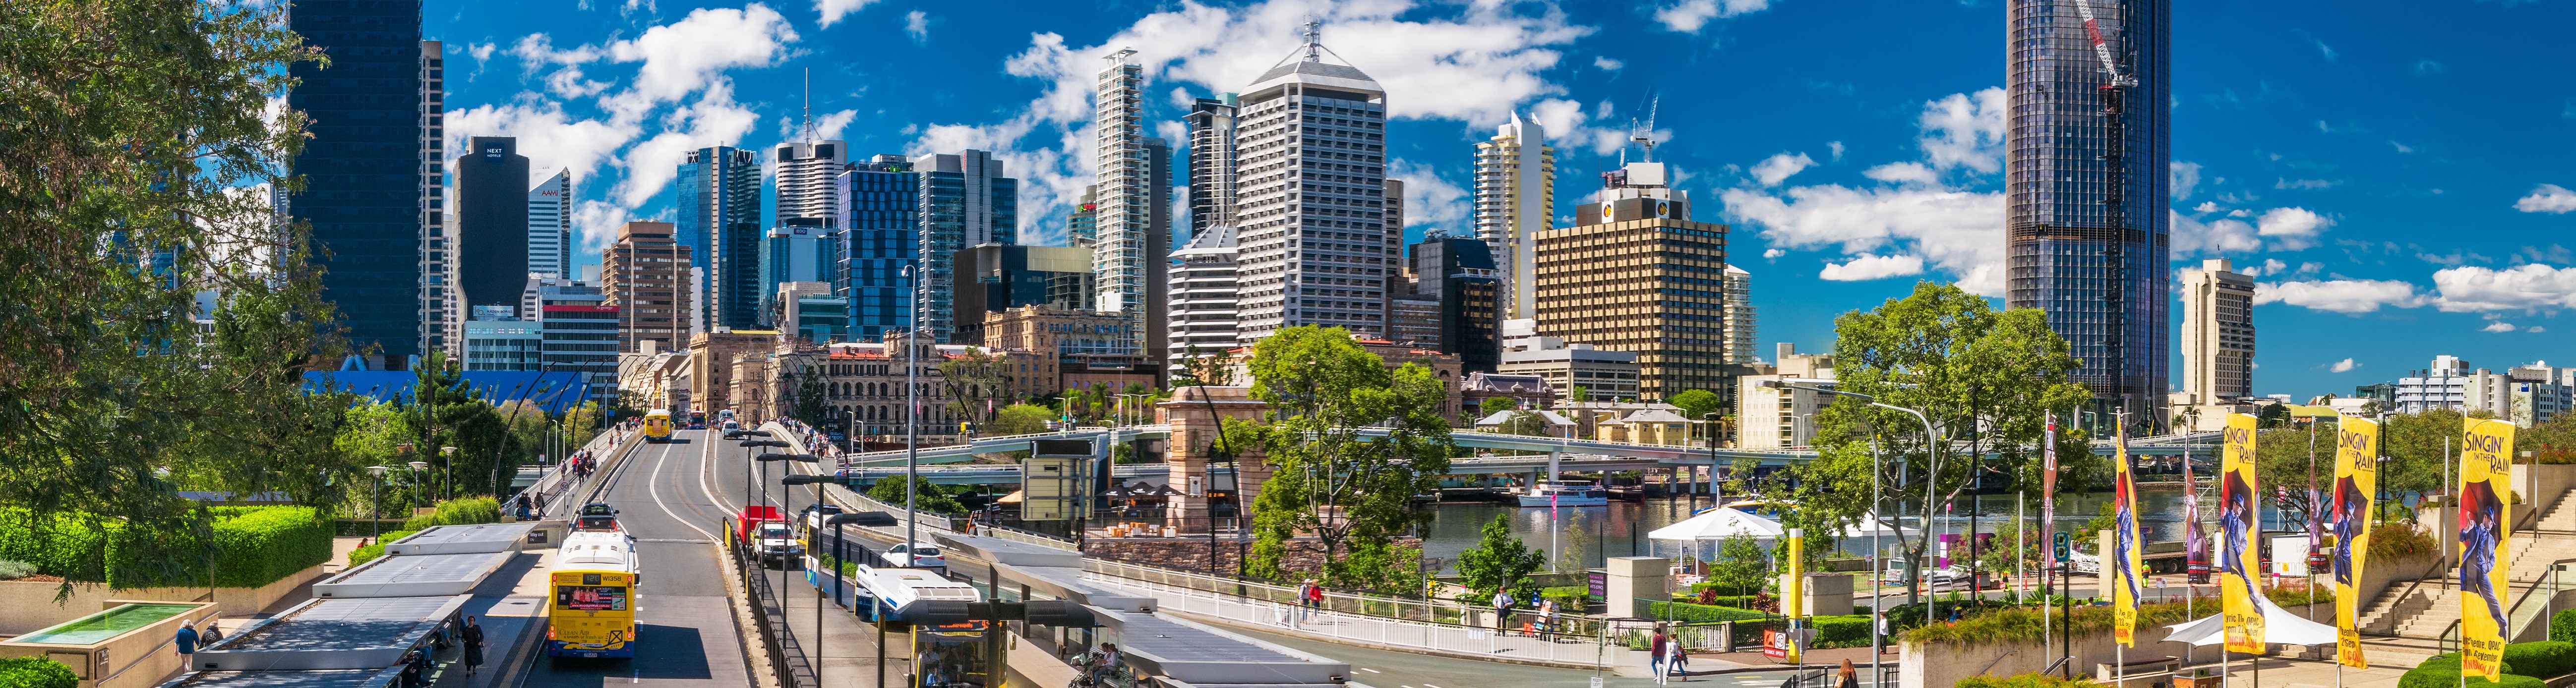 More regional students are moving to Australian cities and universities, except those in Sydney